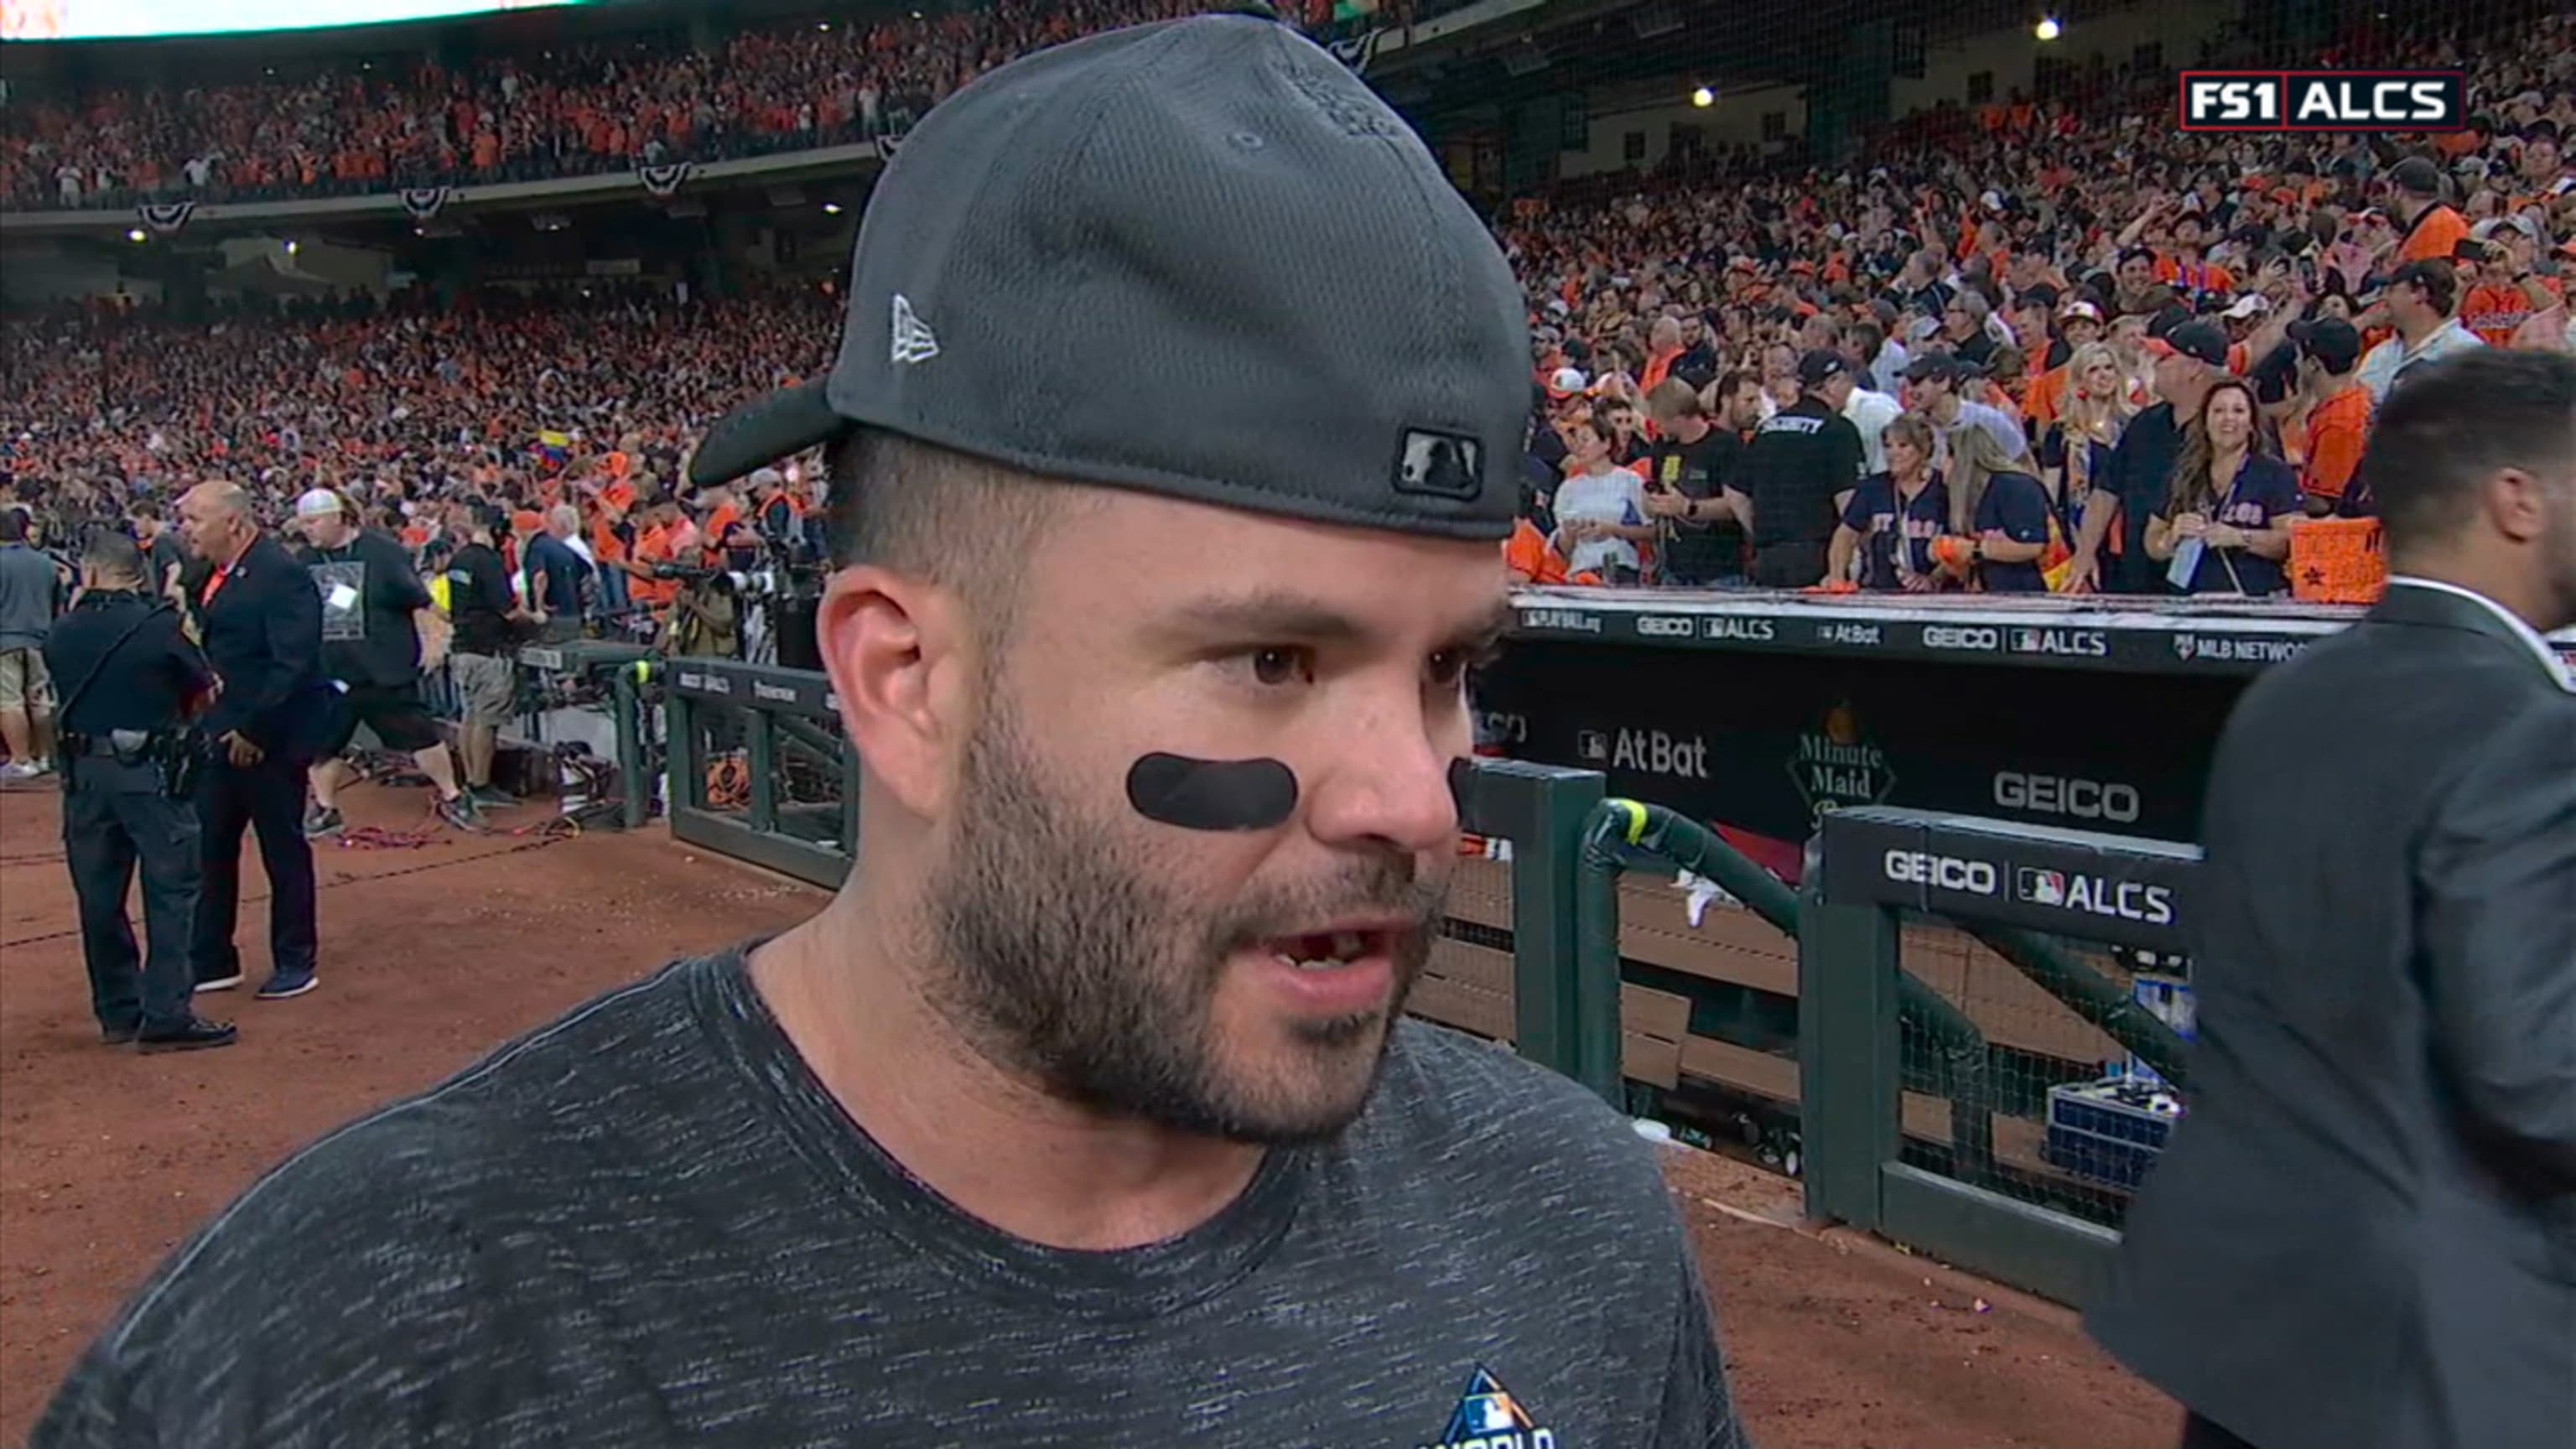 Astros' Jose Altuve gets jersey ripped off after game-winning homer vs.  Yankees